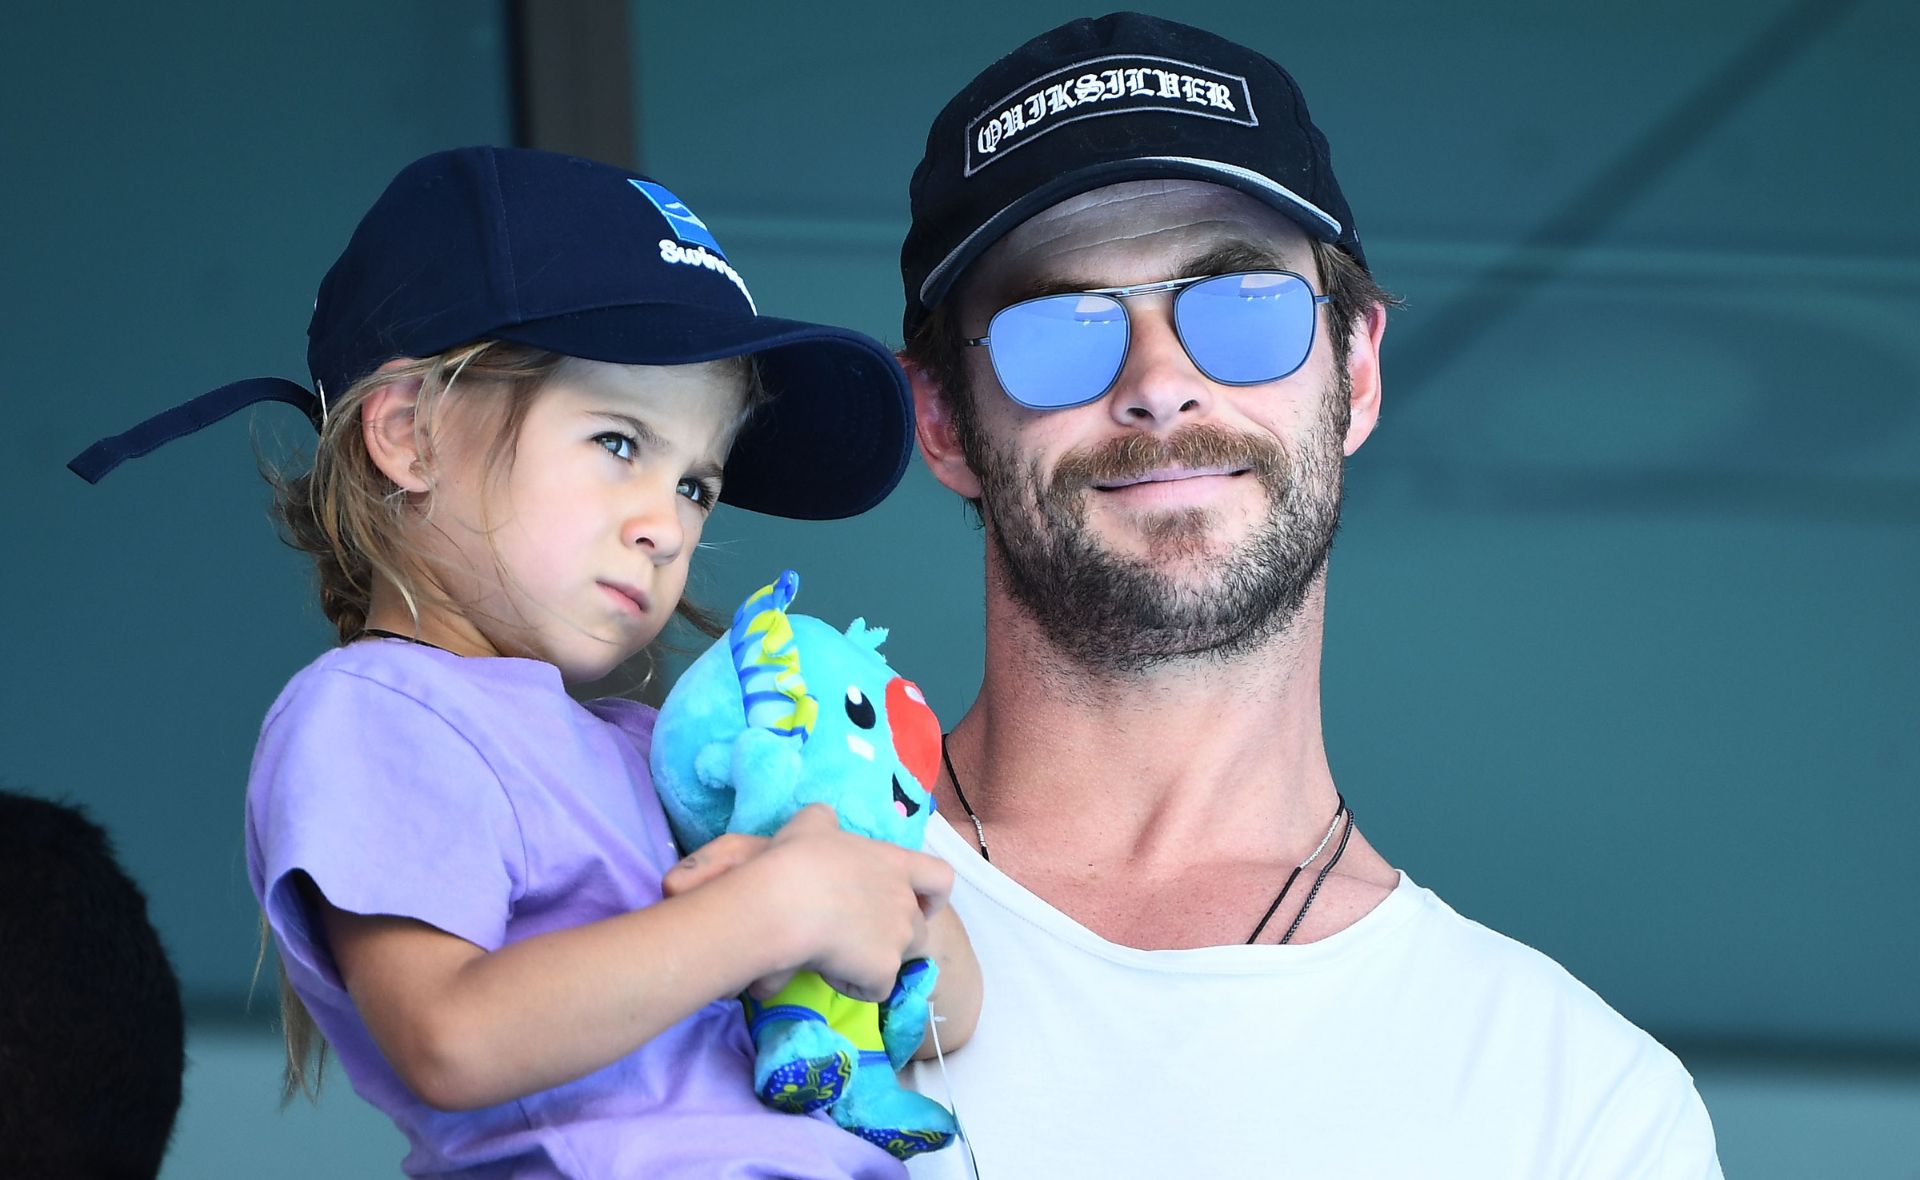 Chris Hemsworth’s lifestyle changes after finding out about Alzheimer’s concerns